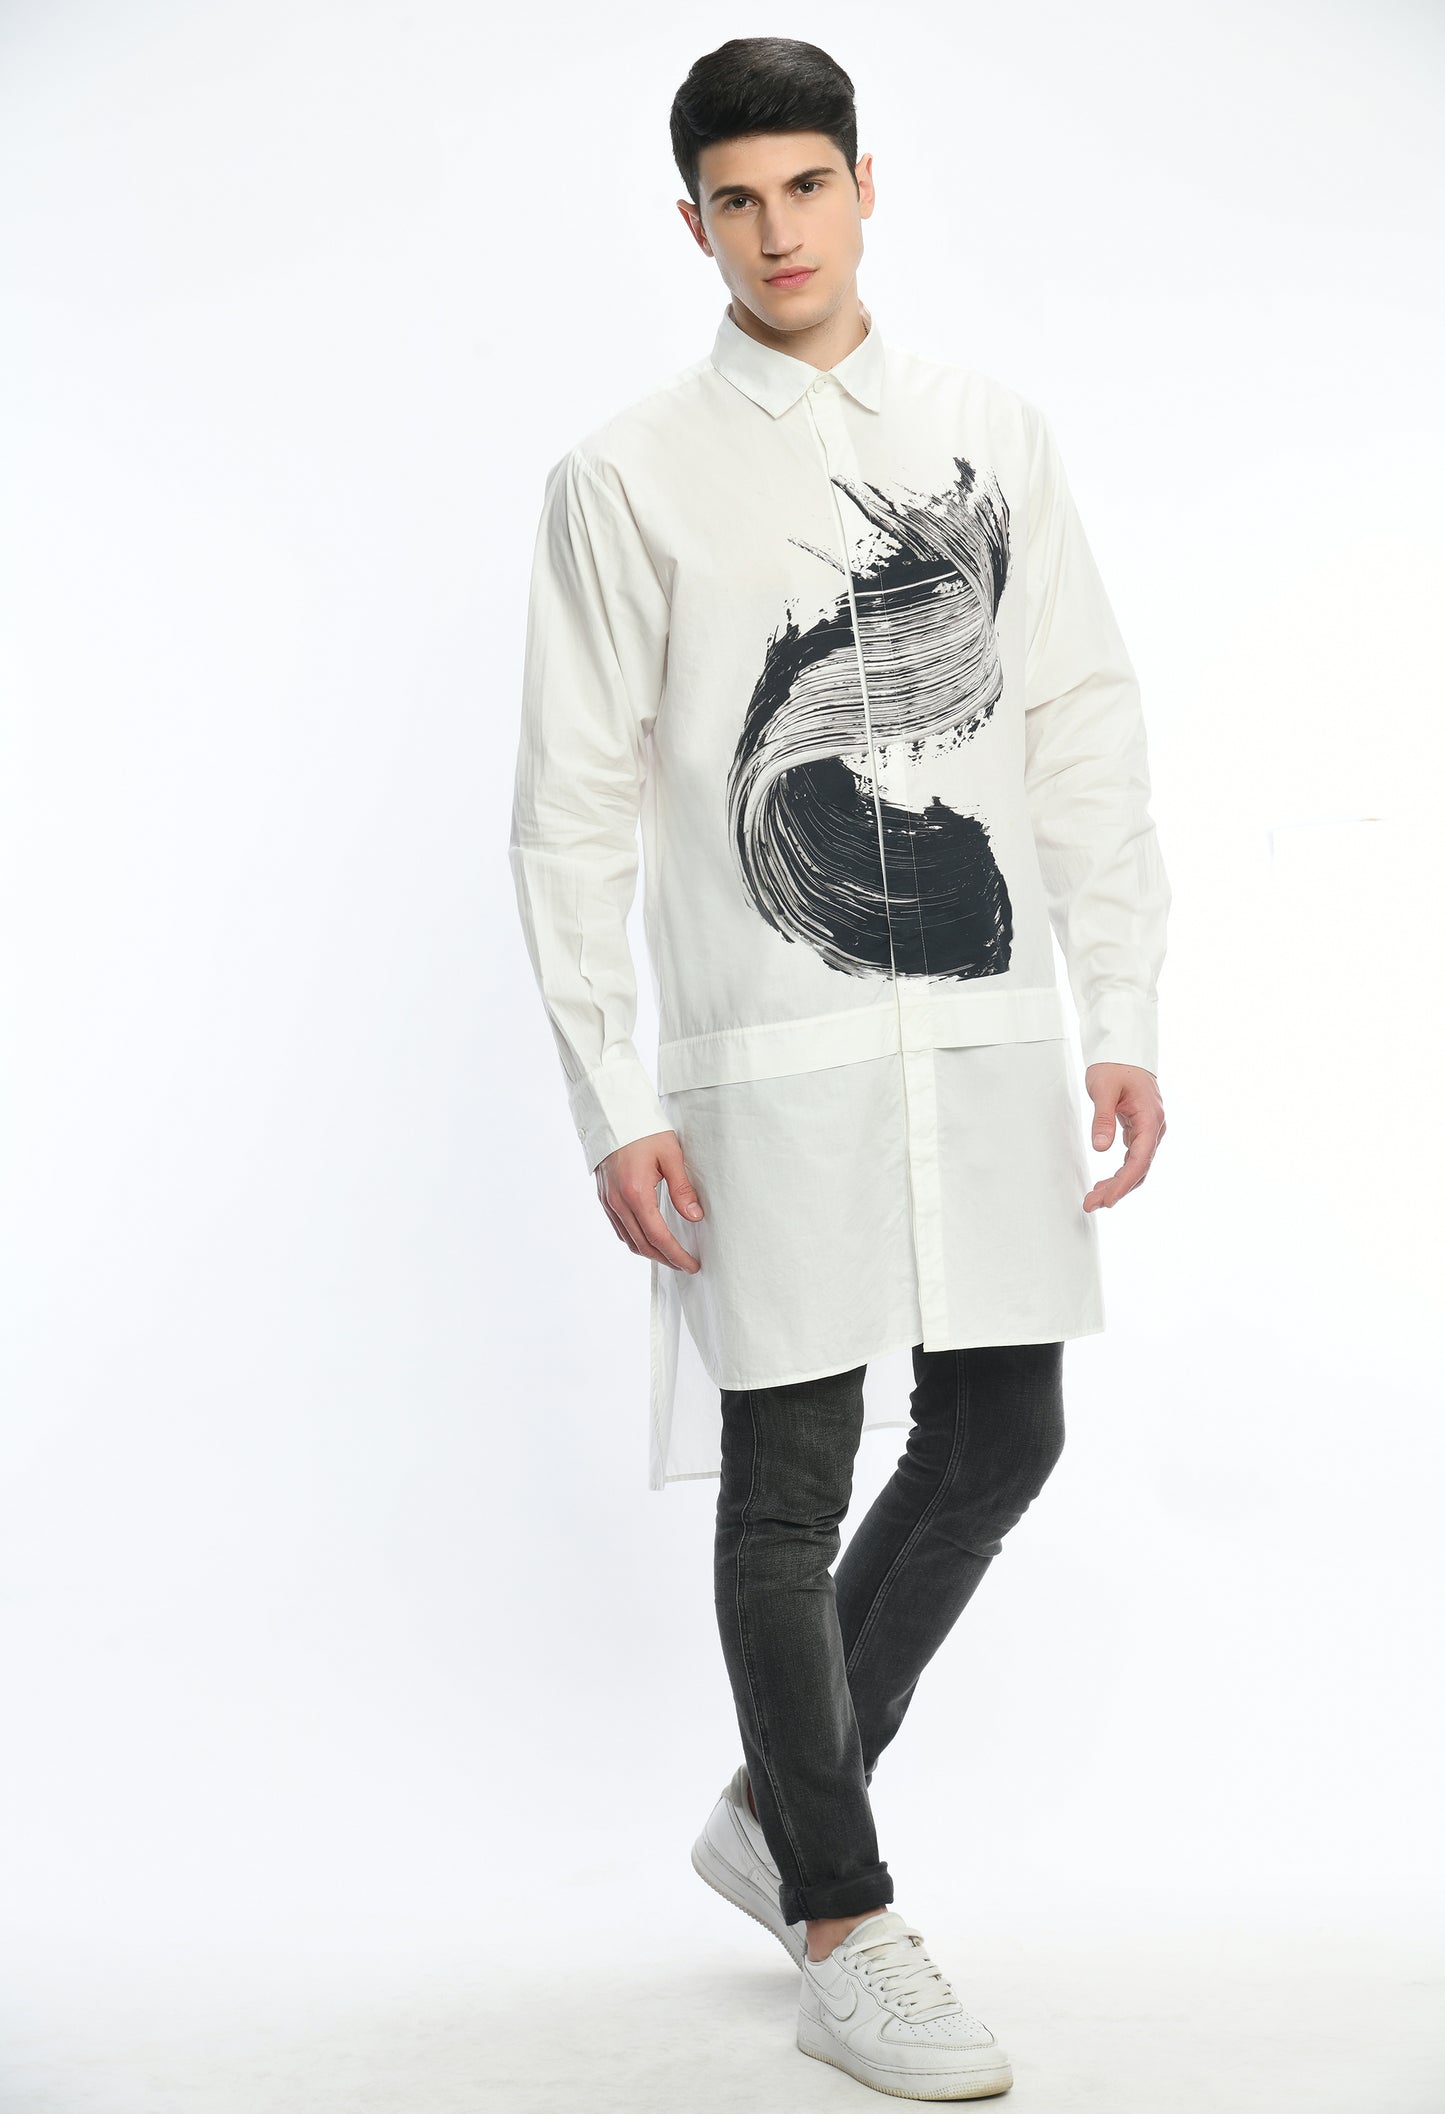 White high low, stylish cotton shirt with digital print on it.